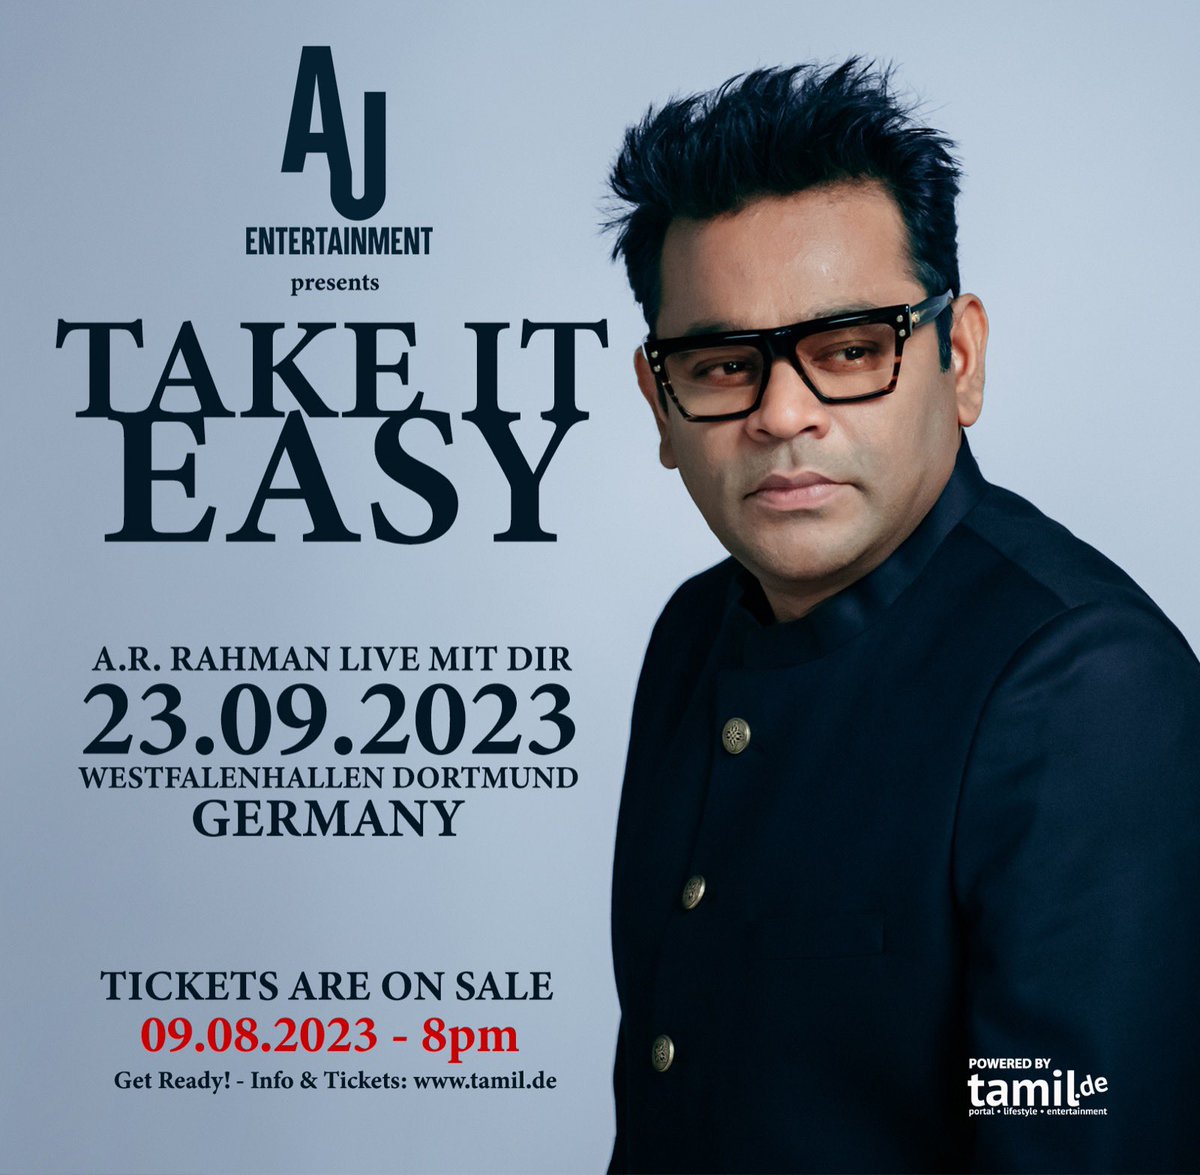 Great news! 🥳 After a long wait, here's the information you've been eagerly anticipating: The @arrahman concert is scheduled for September 23, 2023, at the #westfalenhallen 🇩🇪 You'll be able to purchase tickets online starting next Wednesday. (09.08.2023) Stay Tuned for more